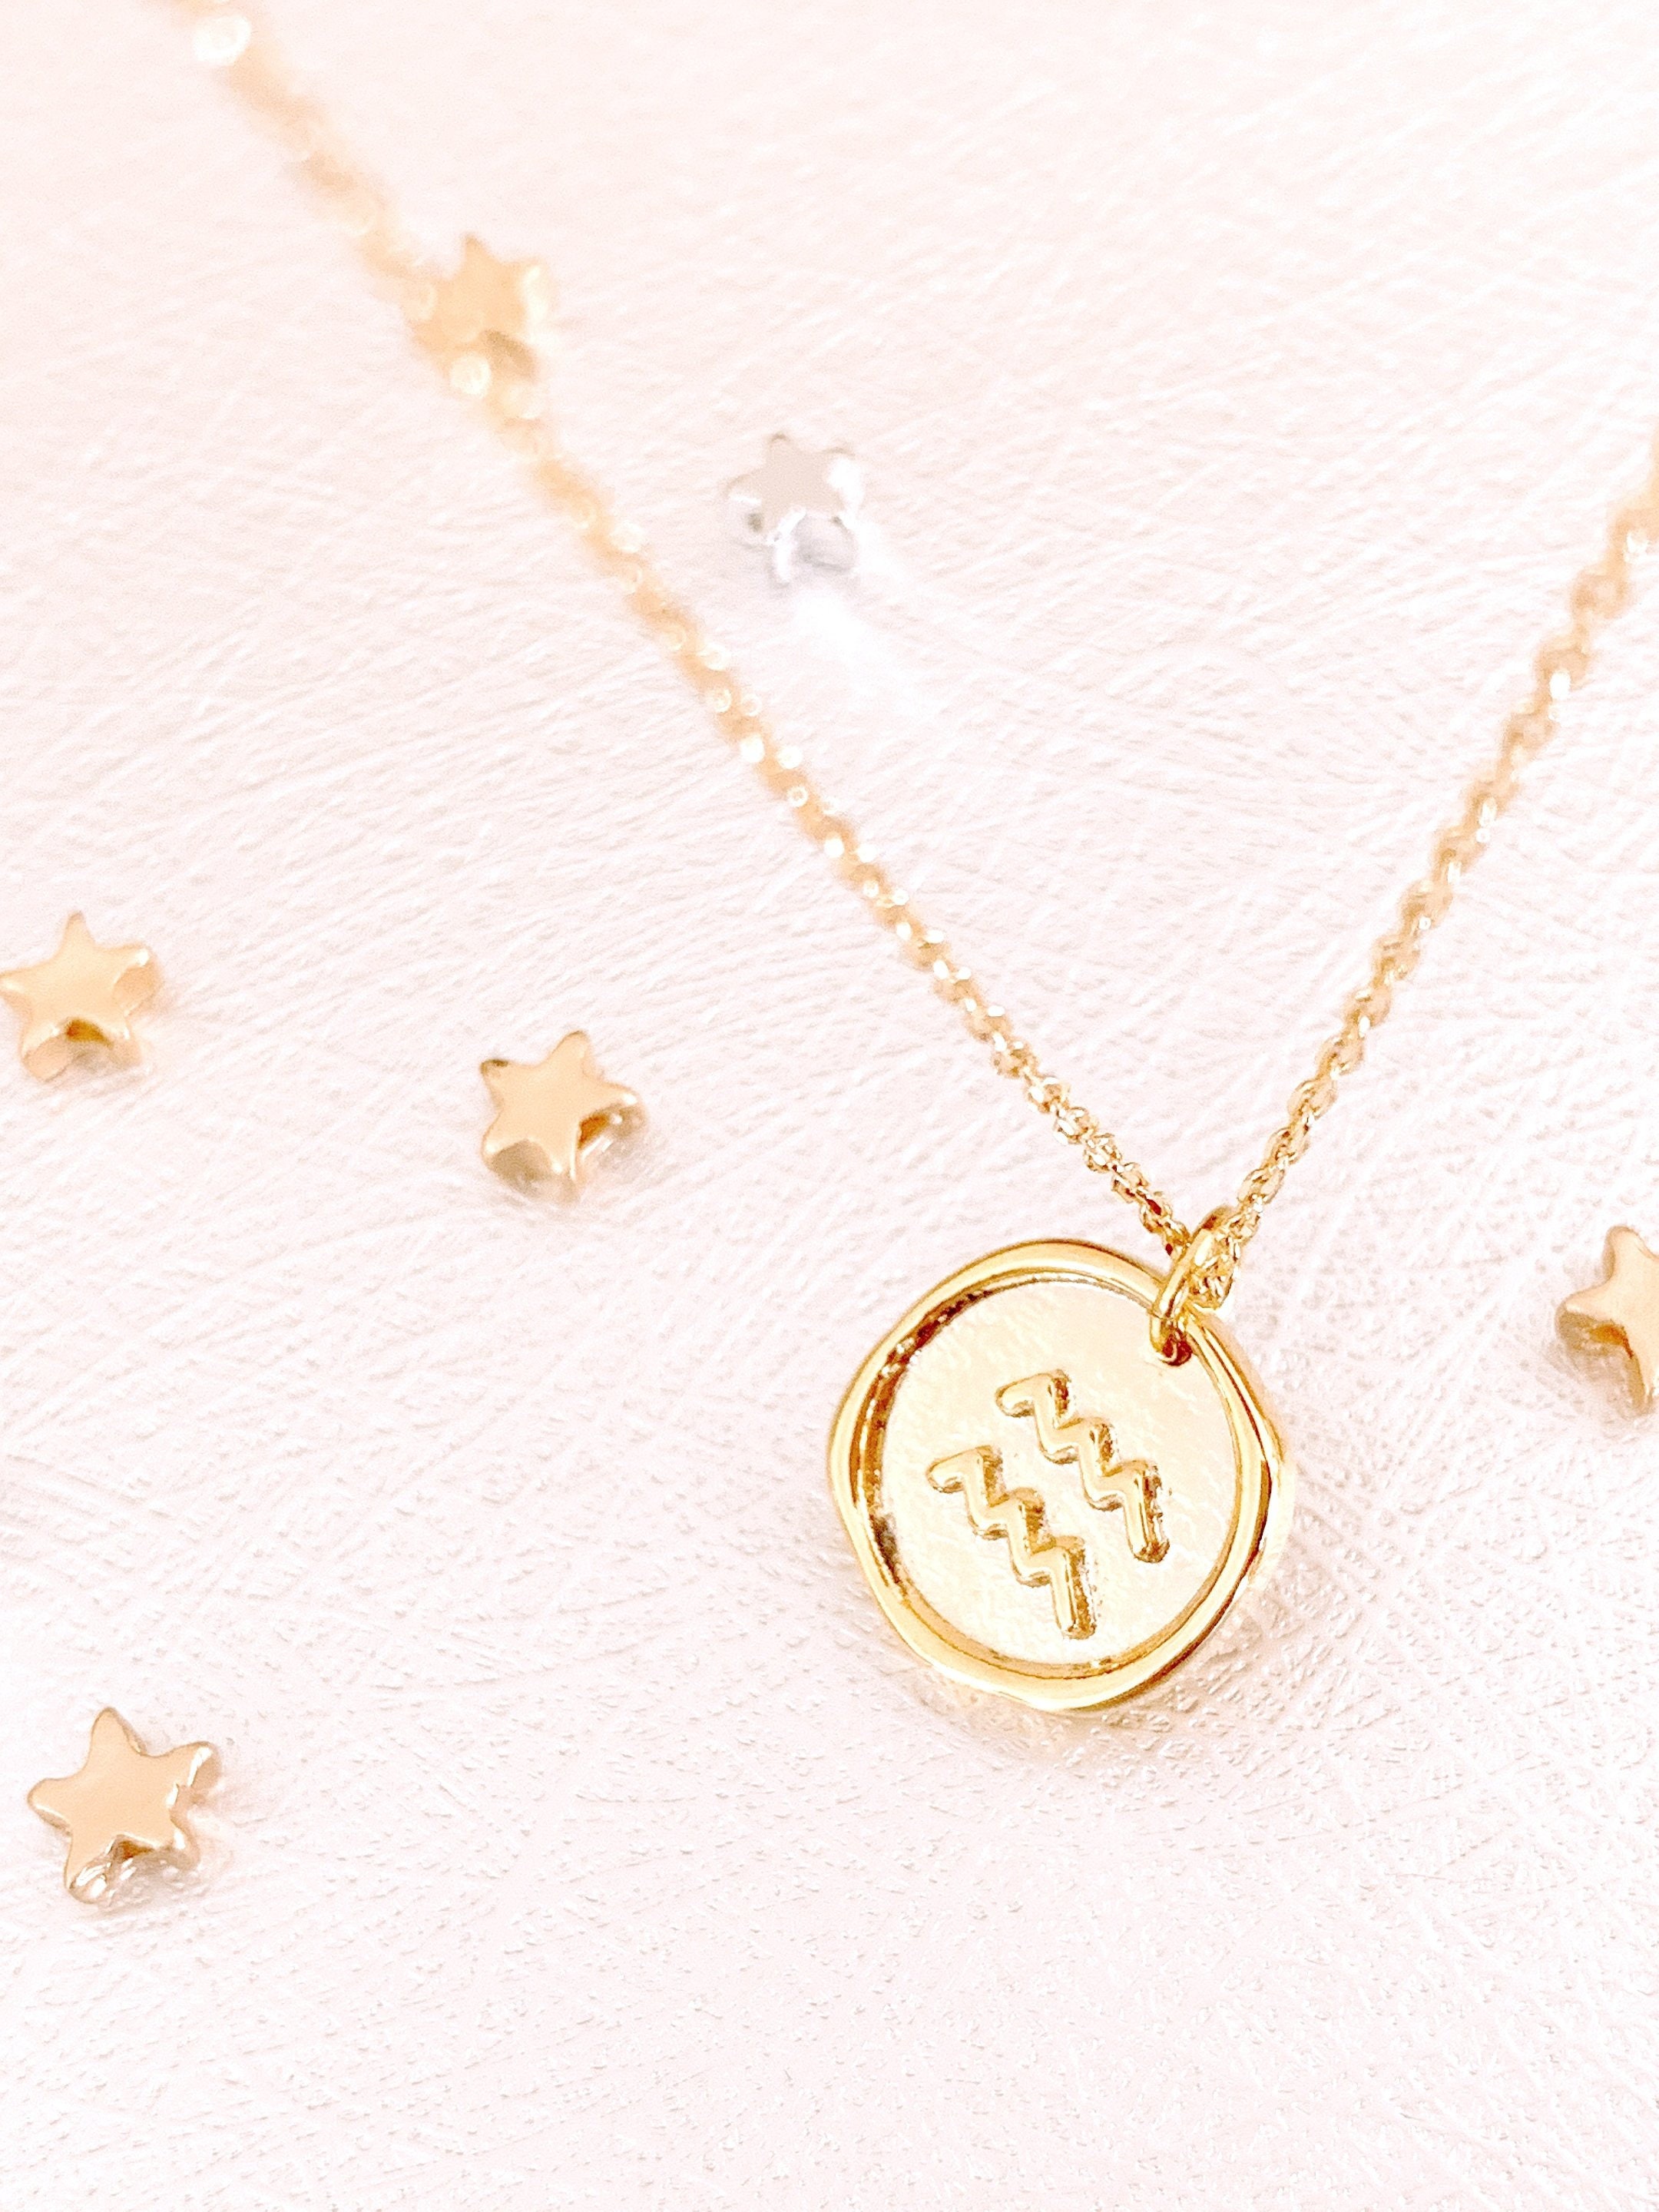 Zodiac Coin Medallion Necklace- Aquarius Necklace - Astrology Sign- Gold Star Jewelry- Vintage Constellations Birthday Gifts